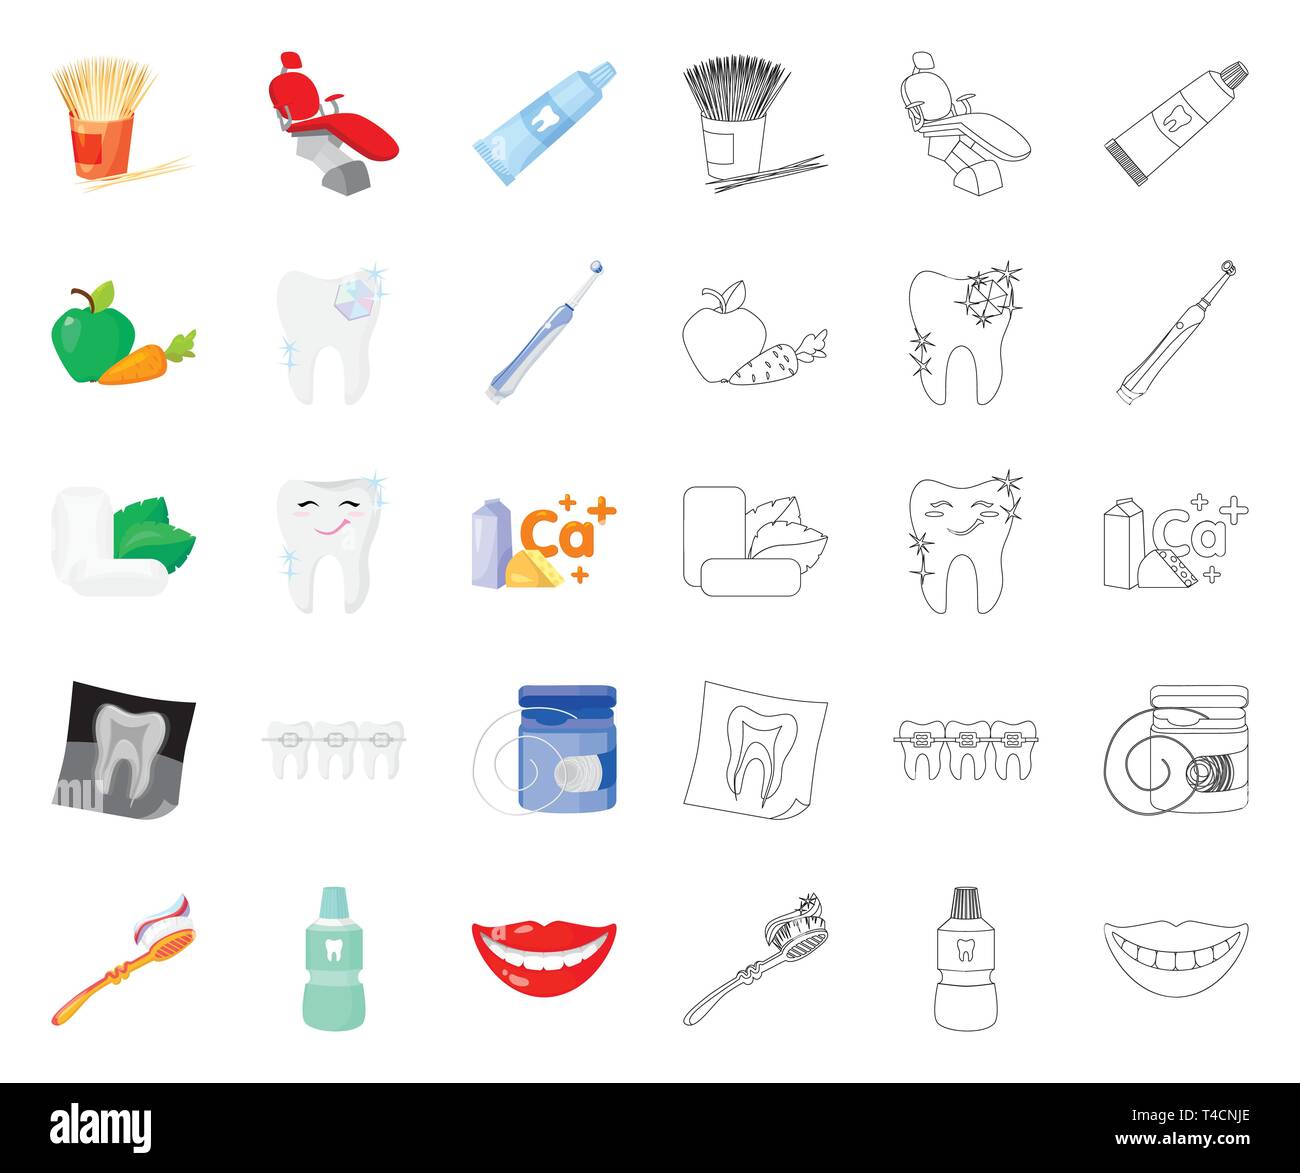 adaptation,apple,art,bottle,braces,calcium,care,carrot,cartoon,outline,chair,chewing,clinic,collection,dental,dentist,dentistry,design,diamond,doctor,electric,equipment,floss,gum,hygiene,icon,illustration,instrument,isolated,logo,medicine,mouthwash,ray,set,sign,smile,smiling,sources,symbol,teeth,tooth,toothbrush,toothpaste,toothpick,treatment,vector,web,white,x Vector Vectors , Stock Vector